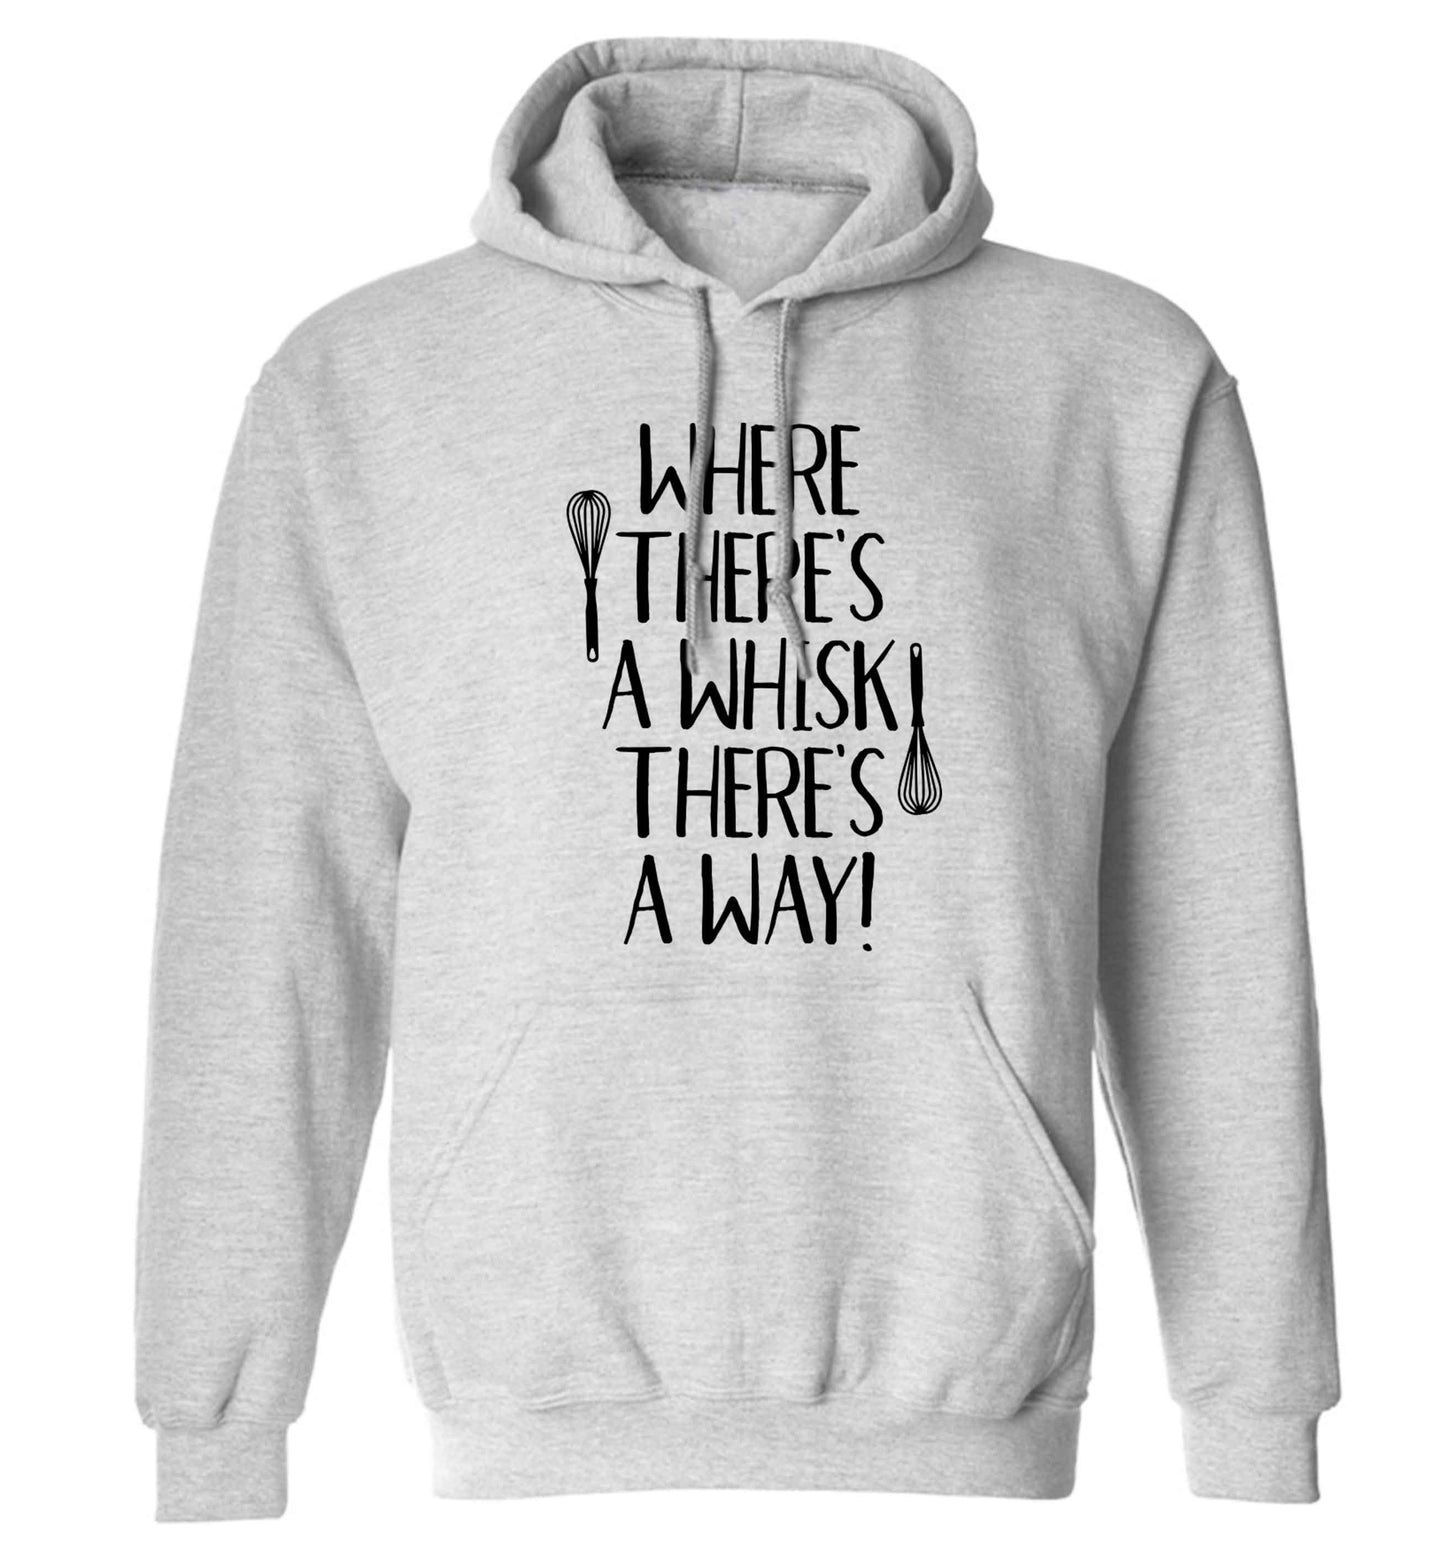 Where there's a whisk there's a way adults unisex grey hoodie 2XL